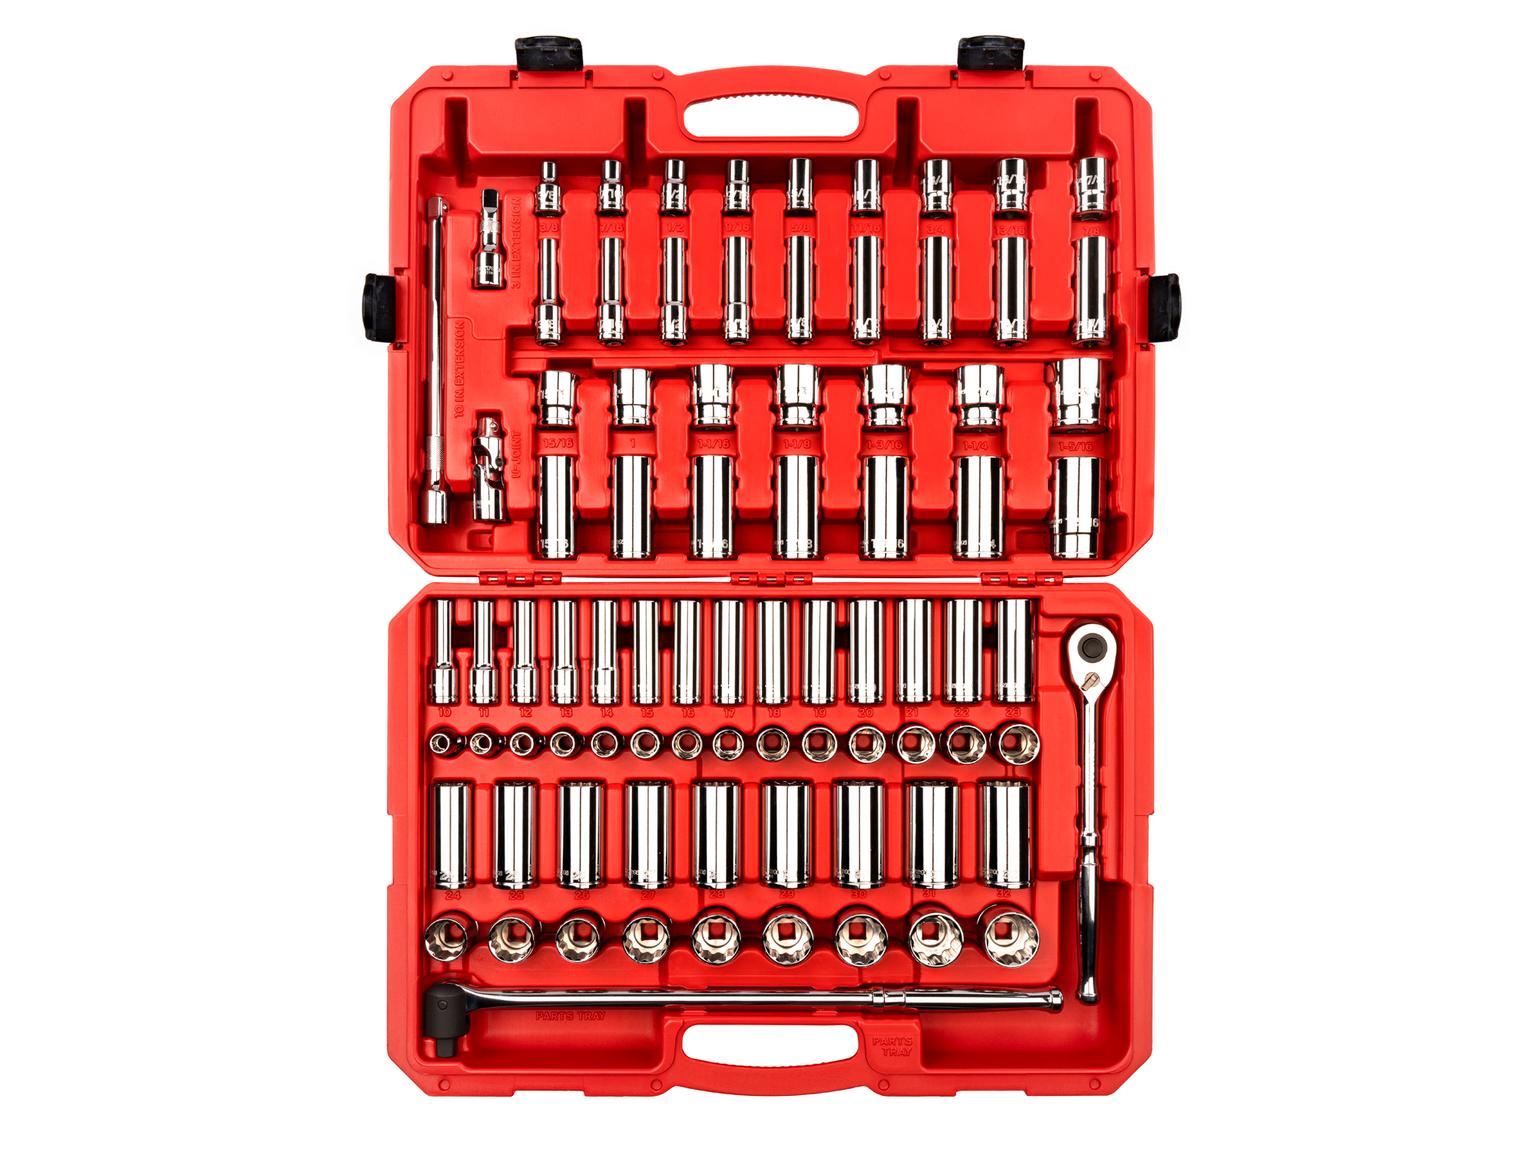 TEKTON SKT25316-D 1/2 Inch Drive 12-Point Socket and Ratchet Set, 83-Piece (3/8 - 1-5/16 in., 10-32 mm)